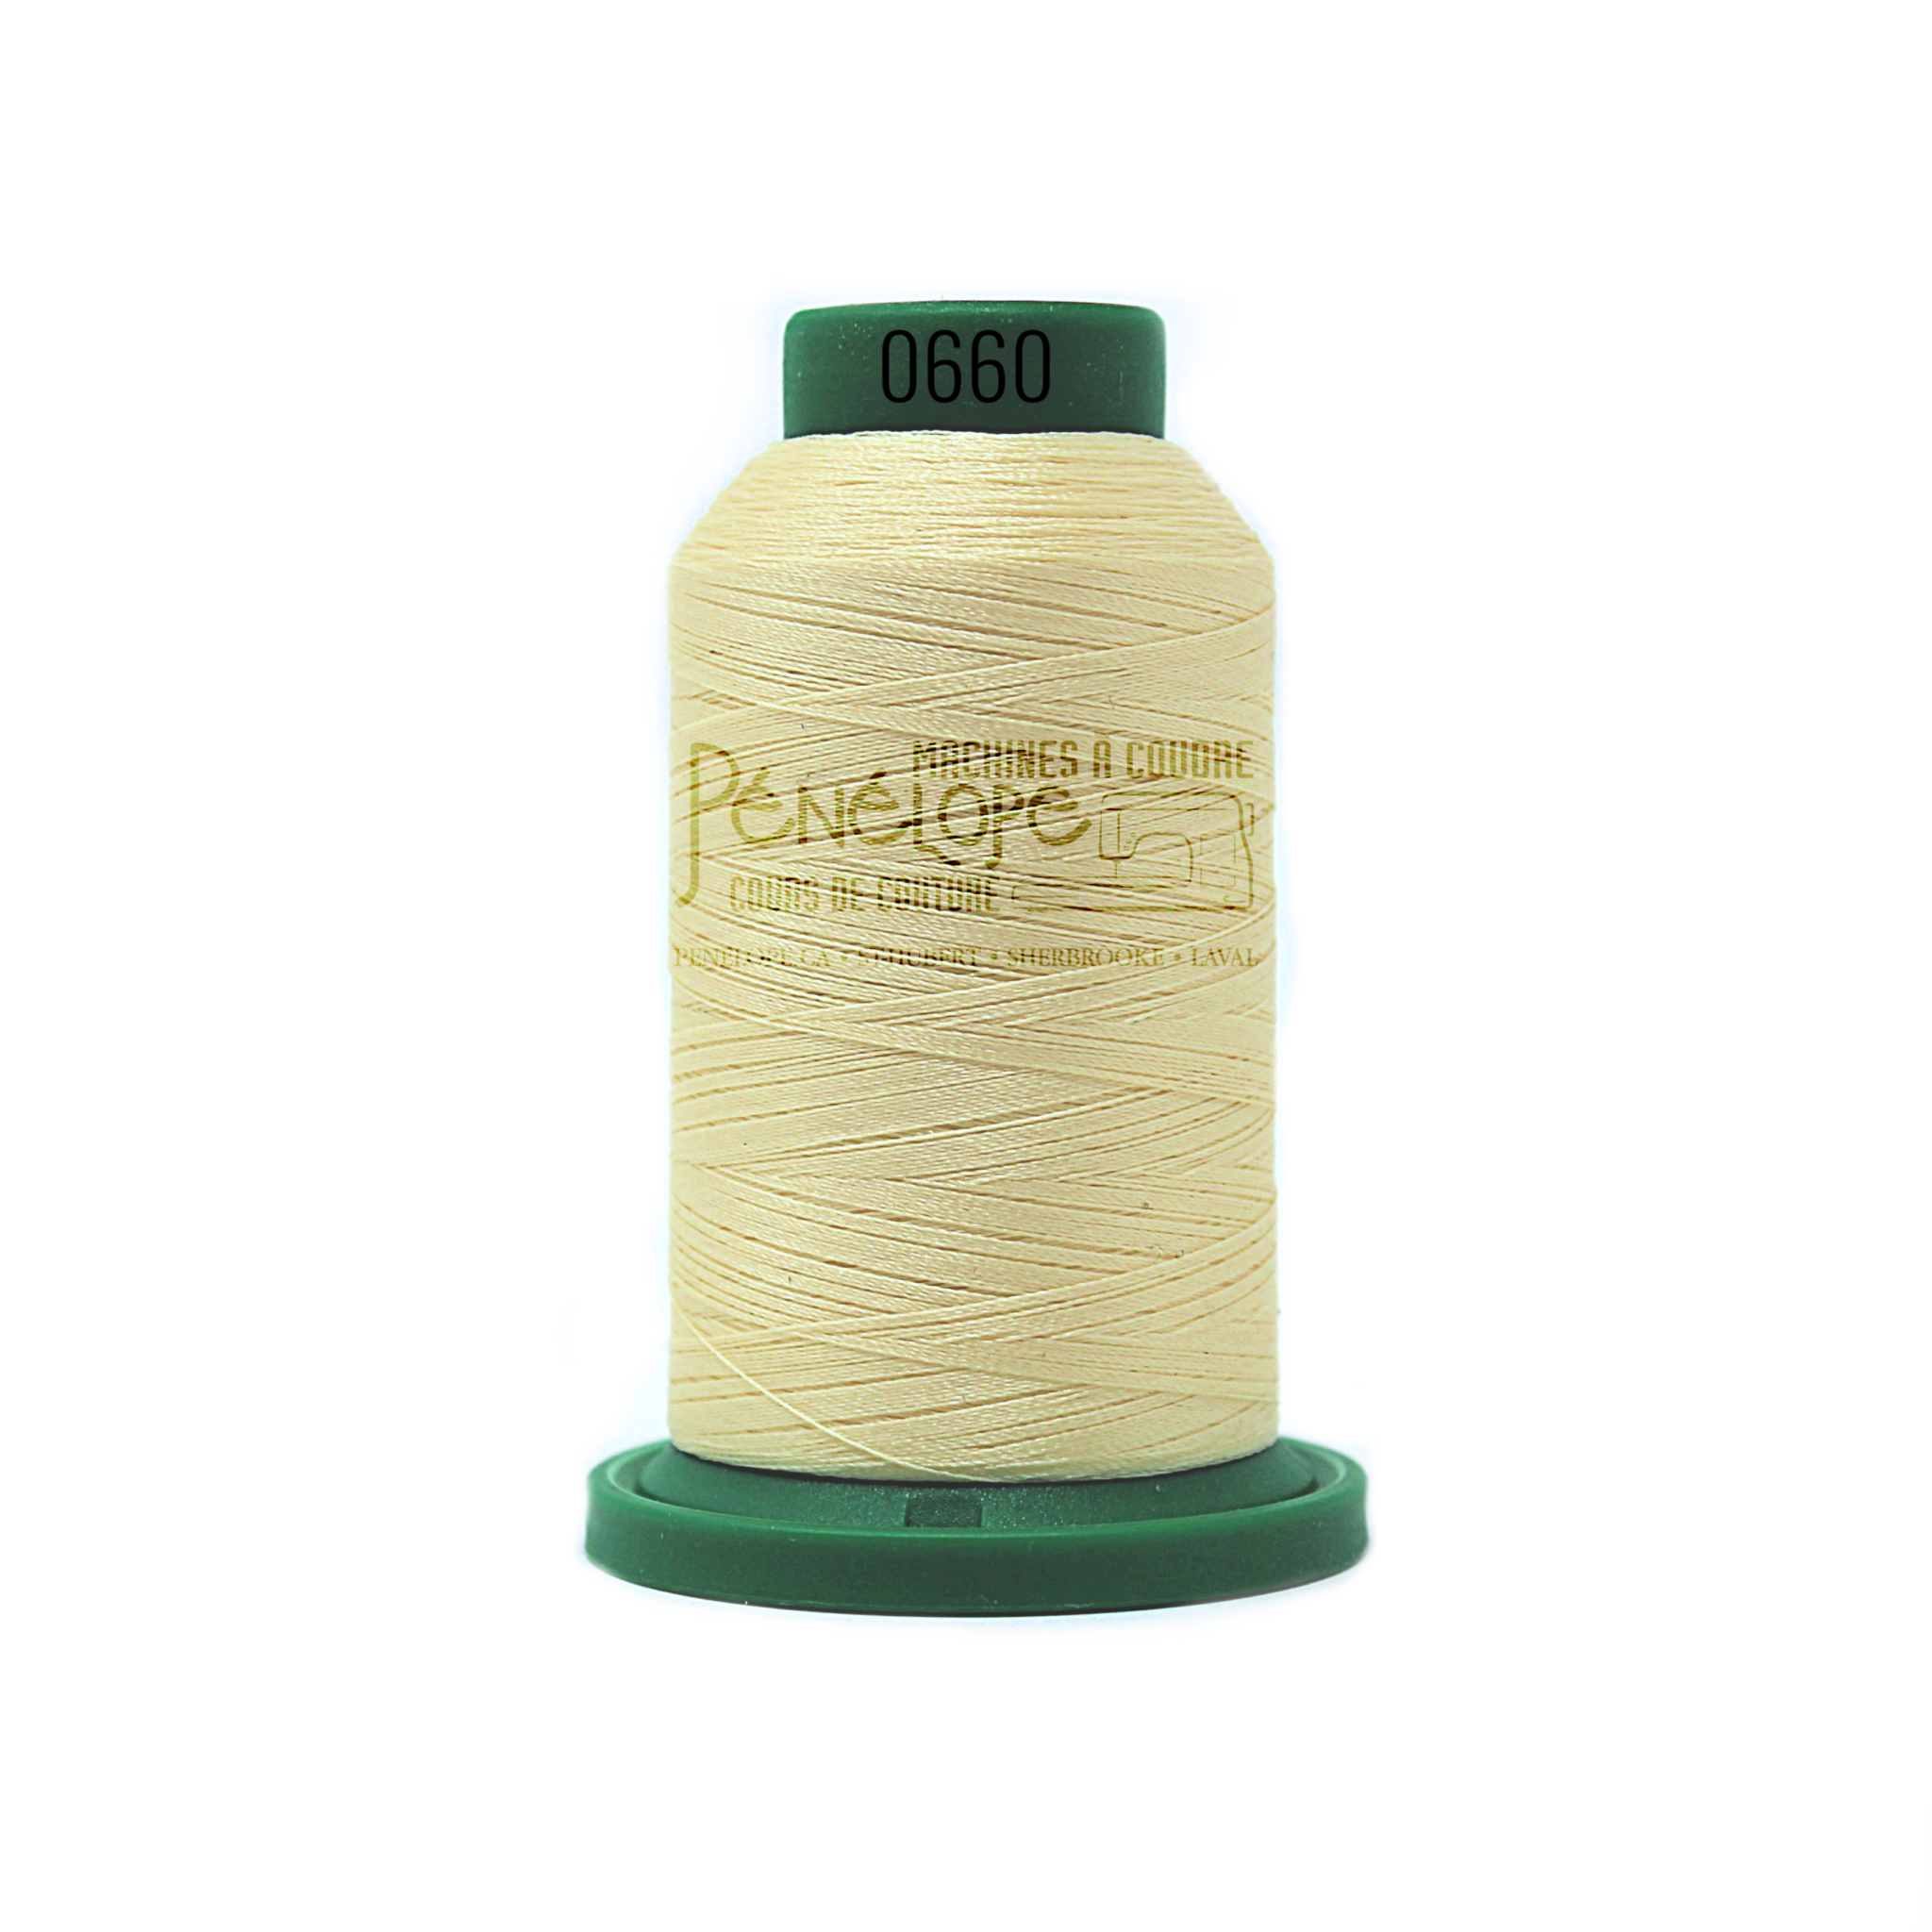 Isacord Isacord sewing and embroidery thread 0660